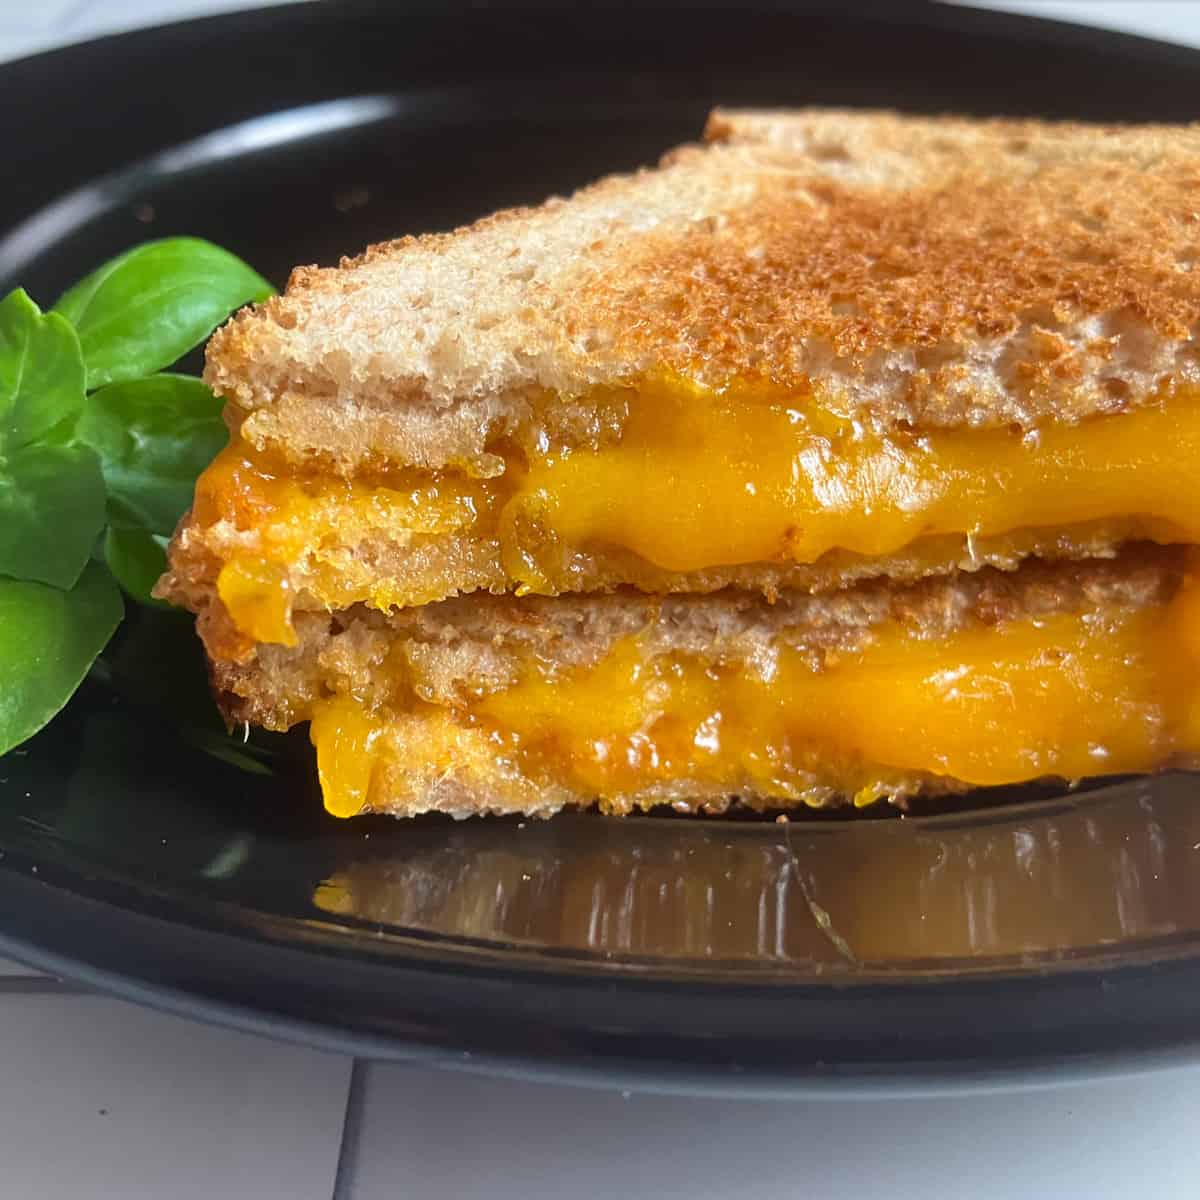 https://summeryule.com/wp-content/uploads/2022/09/microwave-grilled-cheese-recipe.jpeg